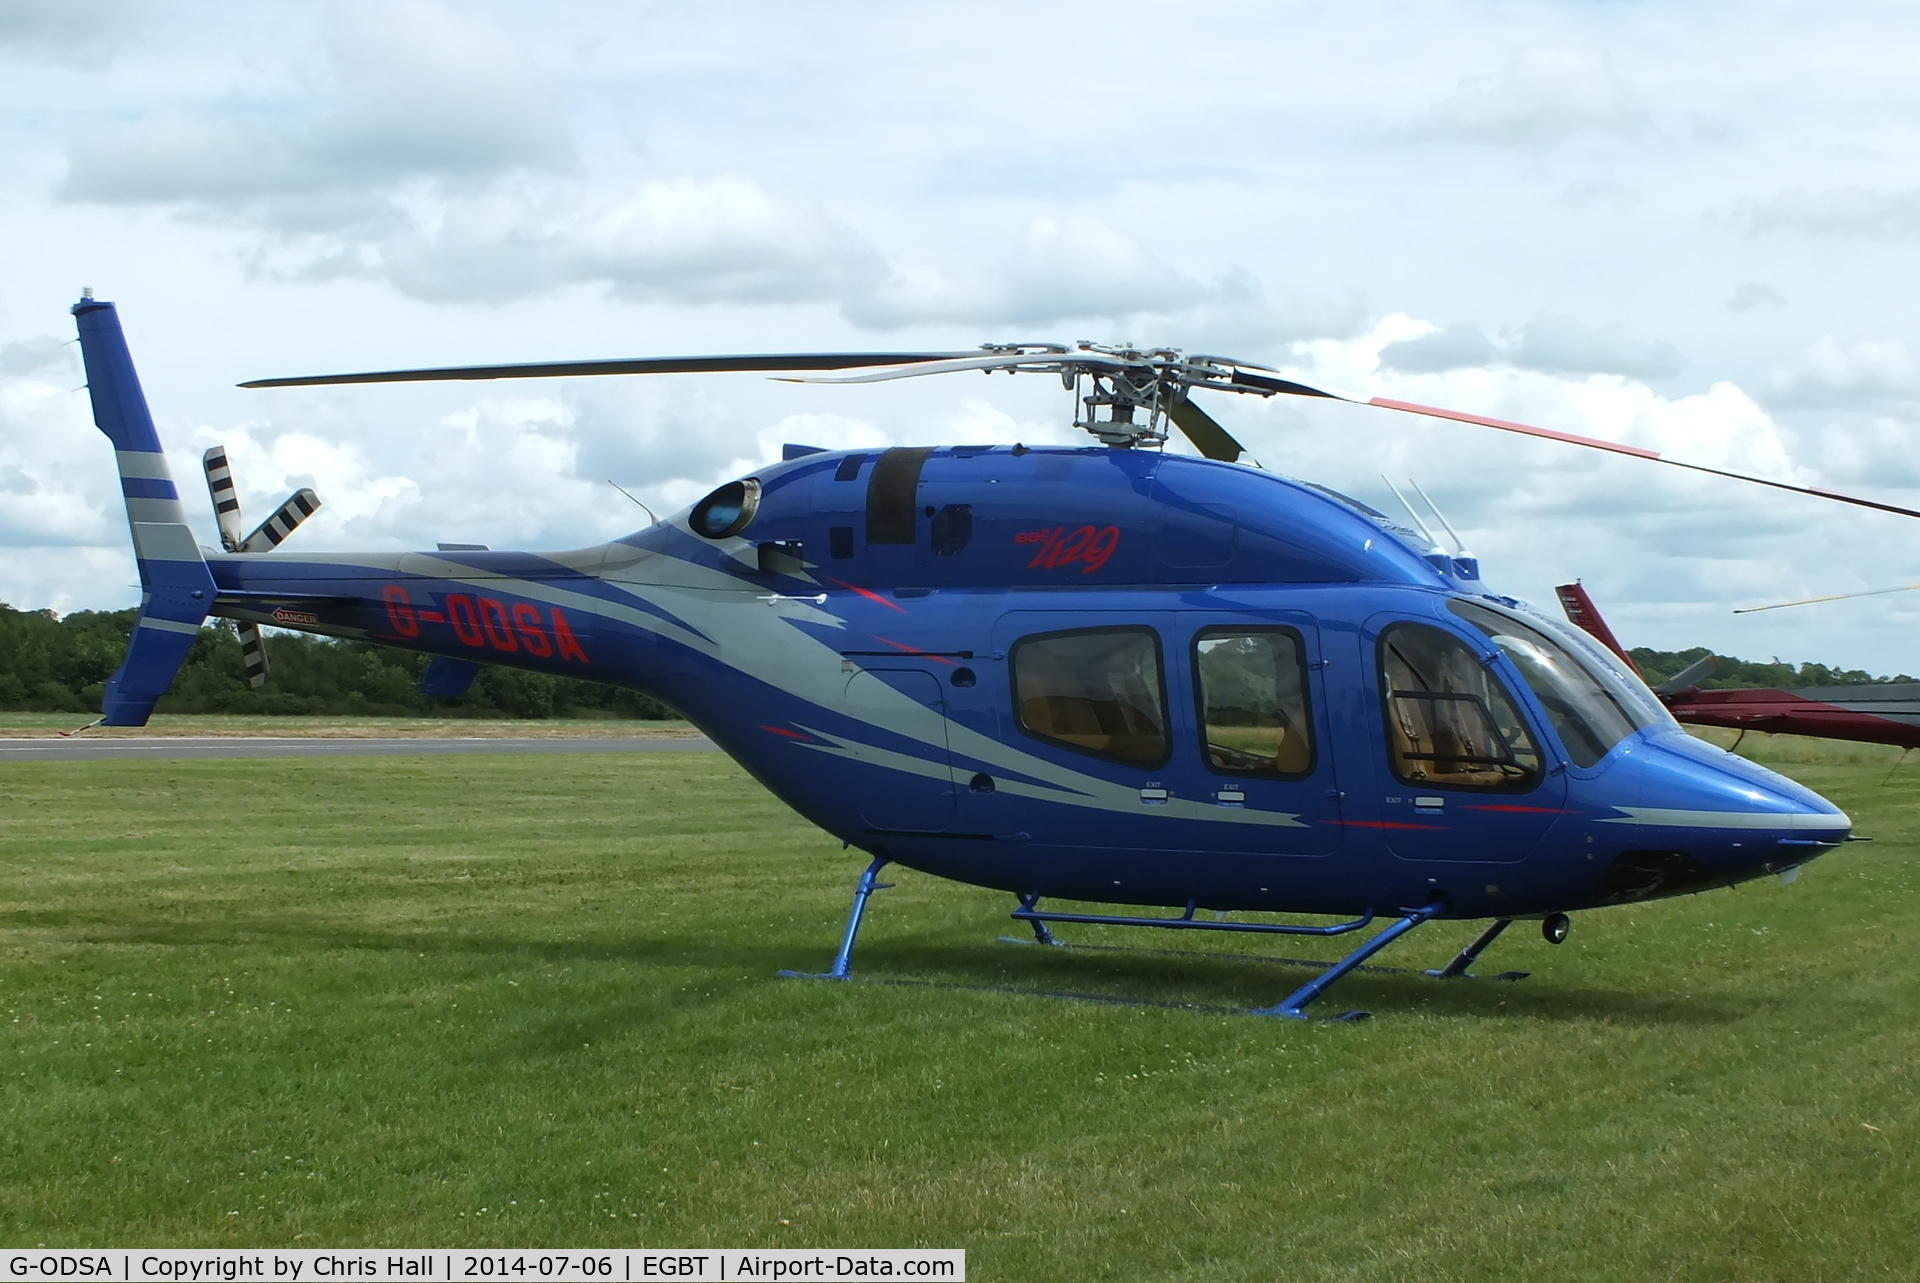 G-ODSA, 2013 Bell 429 GlobalRanger C/N 57139, ferrying race fans to the British F1 Grand Prix at Silverstone